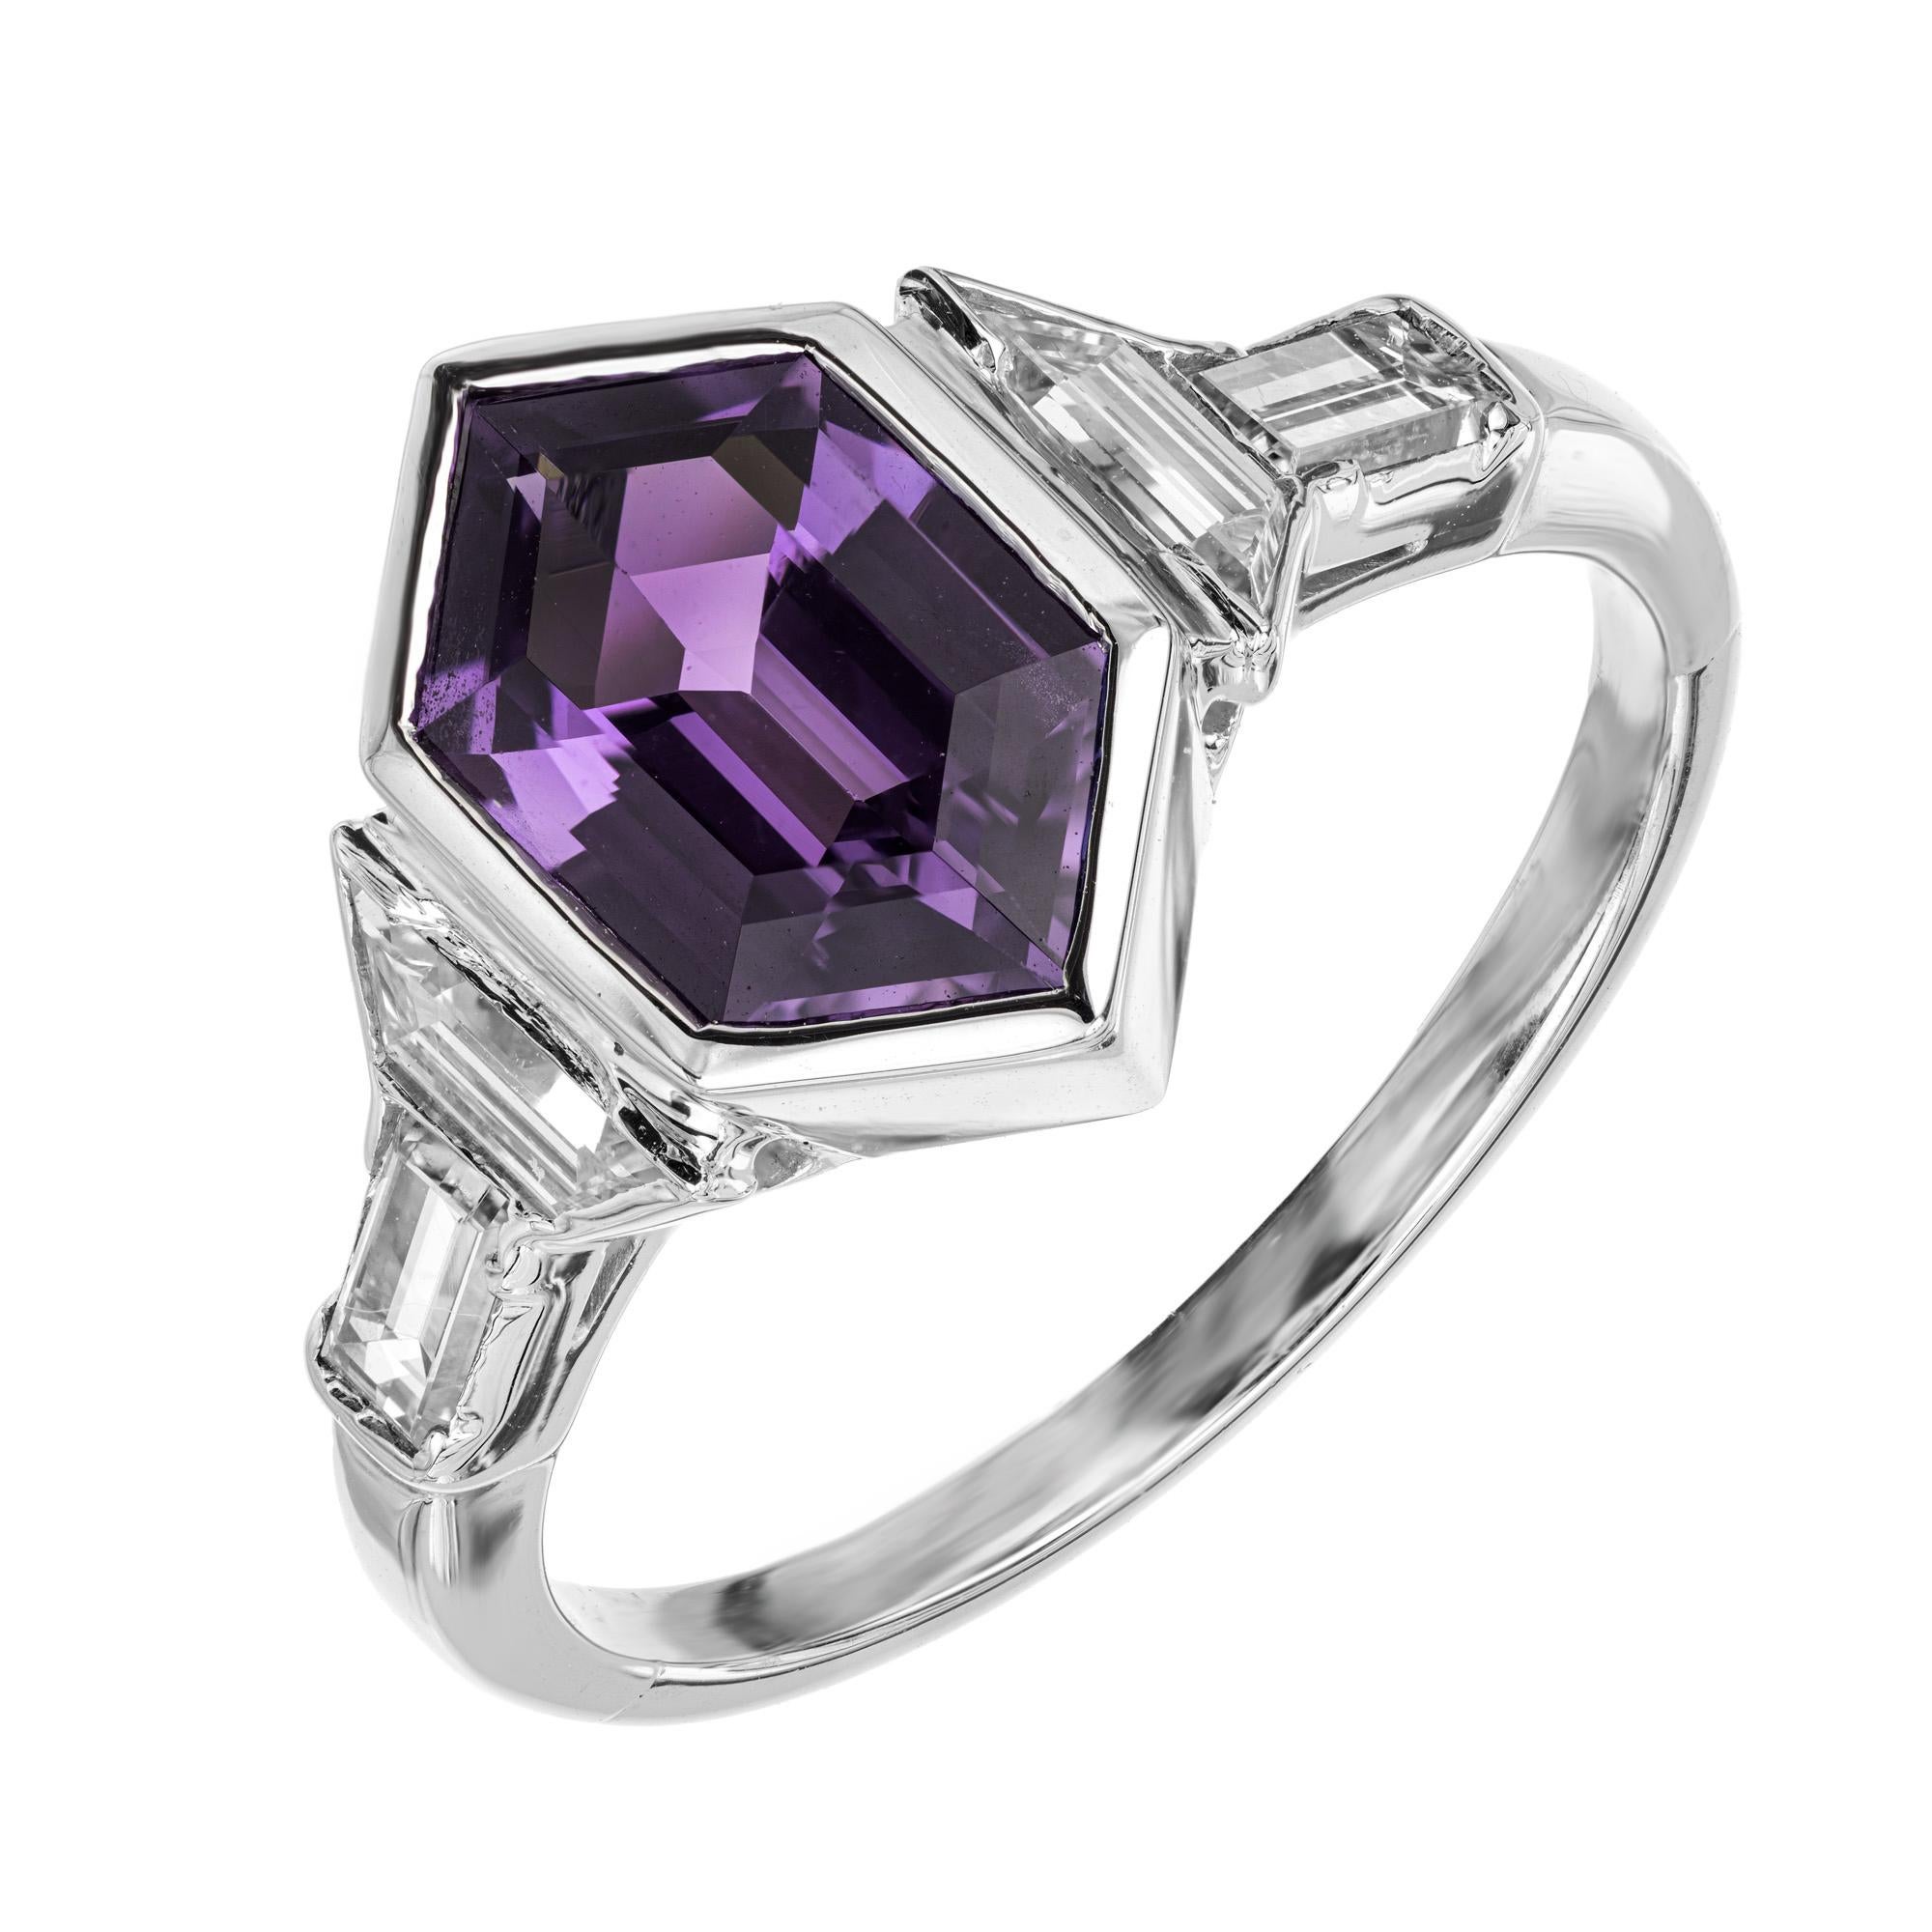 1920's 1.88 Carat Hexagonal Sapphire and Diamond Art Deco Platinum Engagement Ring. The centerpiece of the ring is a mesmerizing hexagonal 1.88ct sapphire, certified by the GIA as natural, no heat. With its deep purple hue and exceptional clarity it